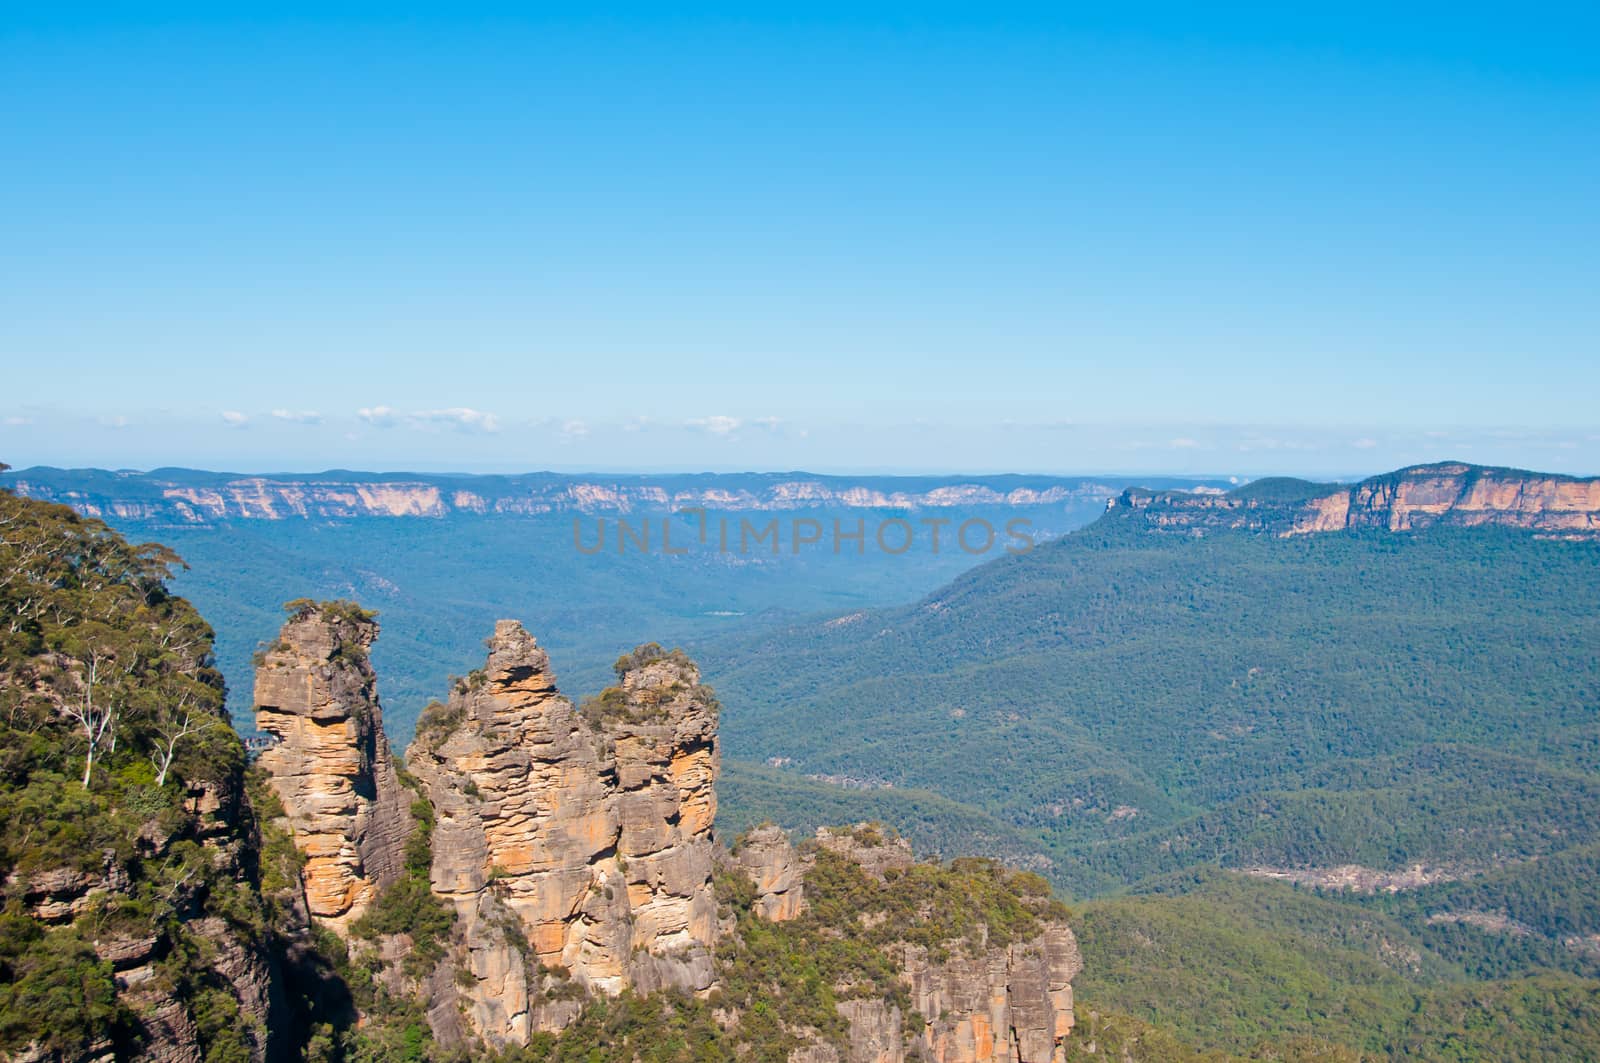 Famous Three sisters rock formation at Blue Mountain in Sydney NSW Australia